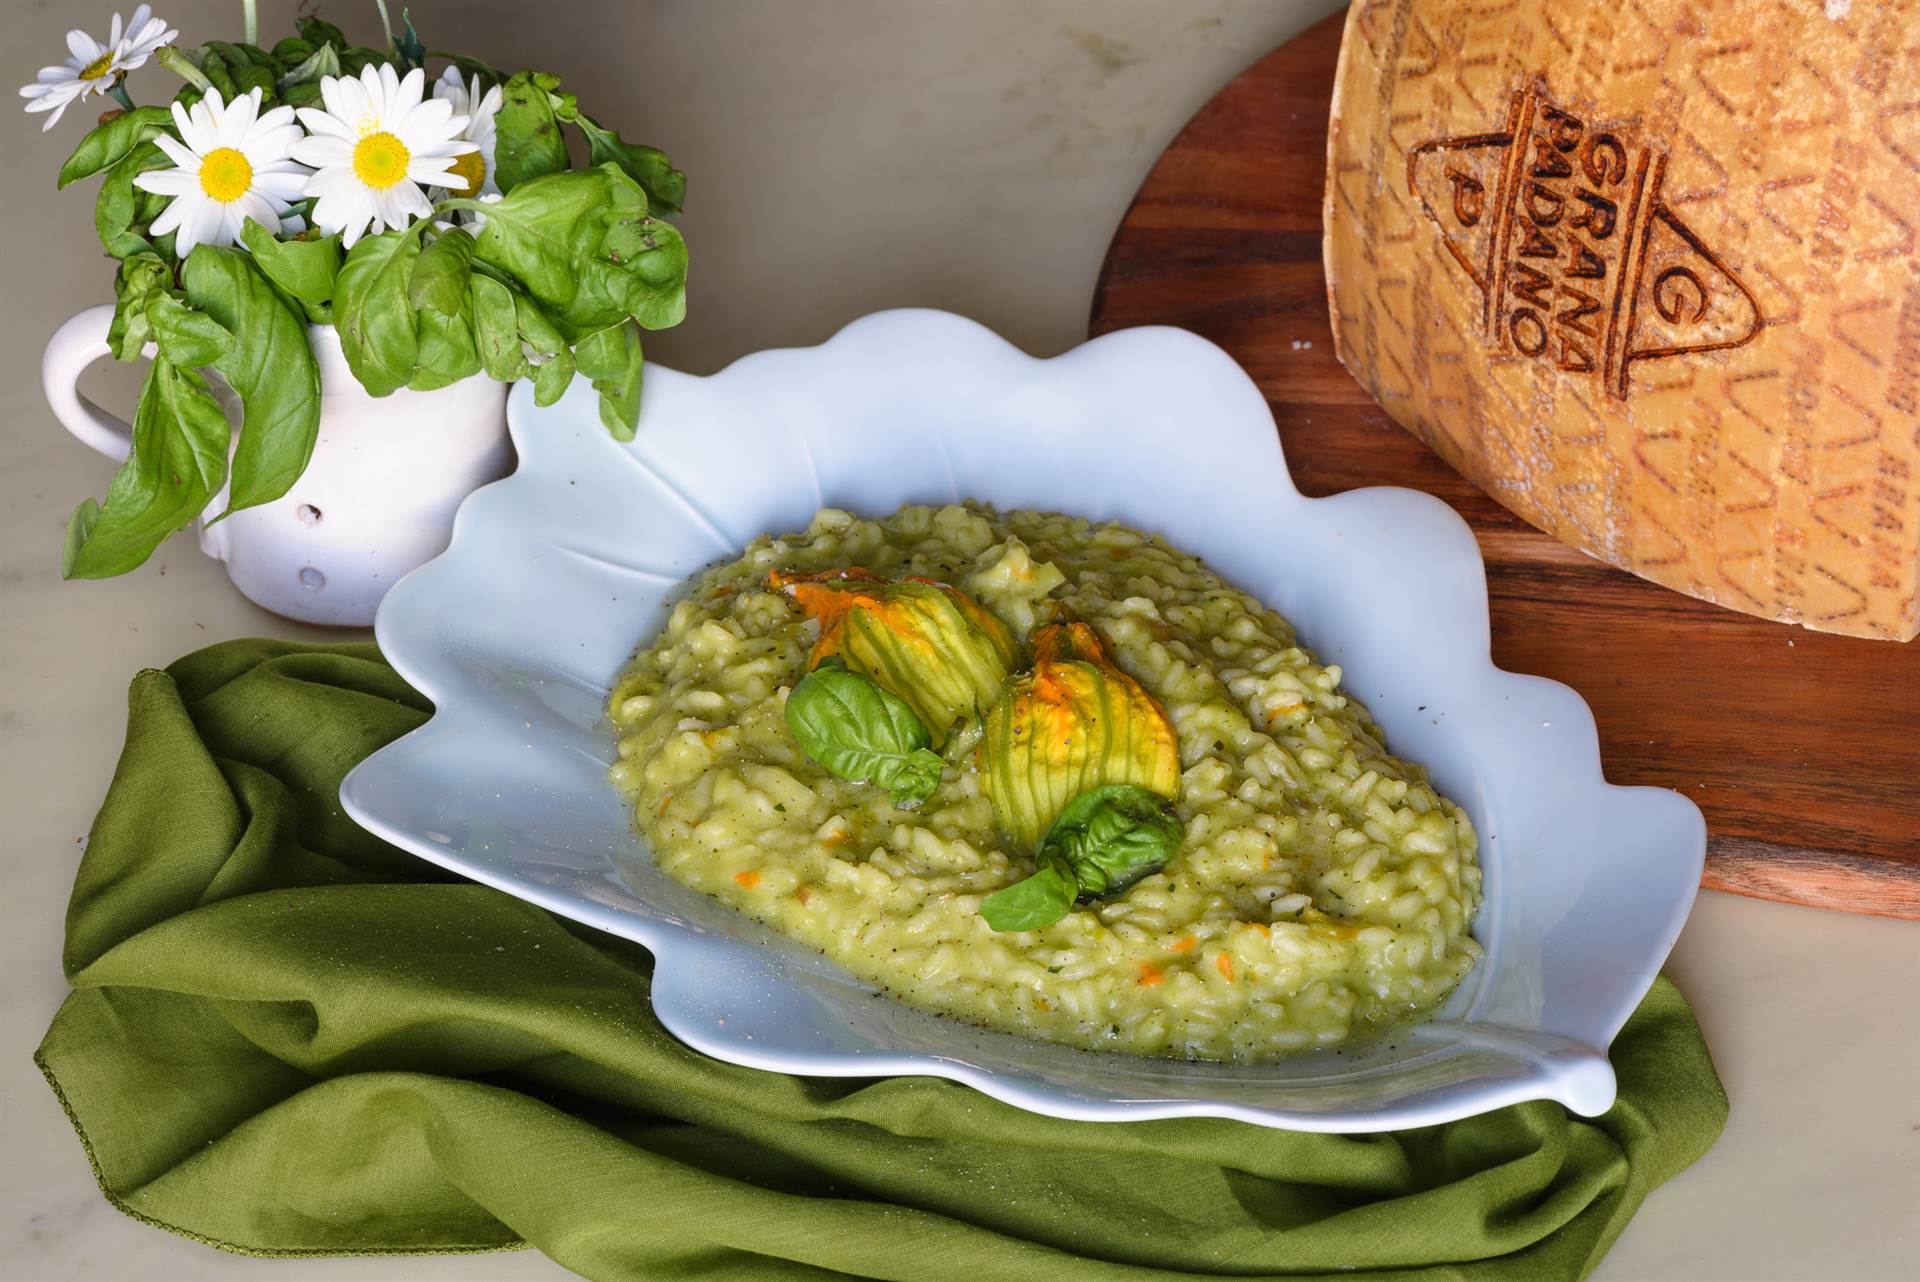 Risotto with zucchini and stuffed blossoms